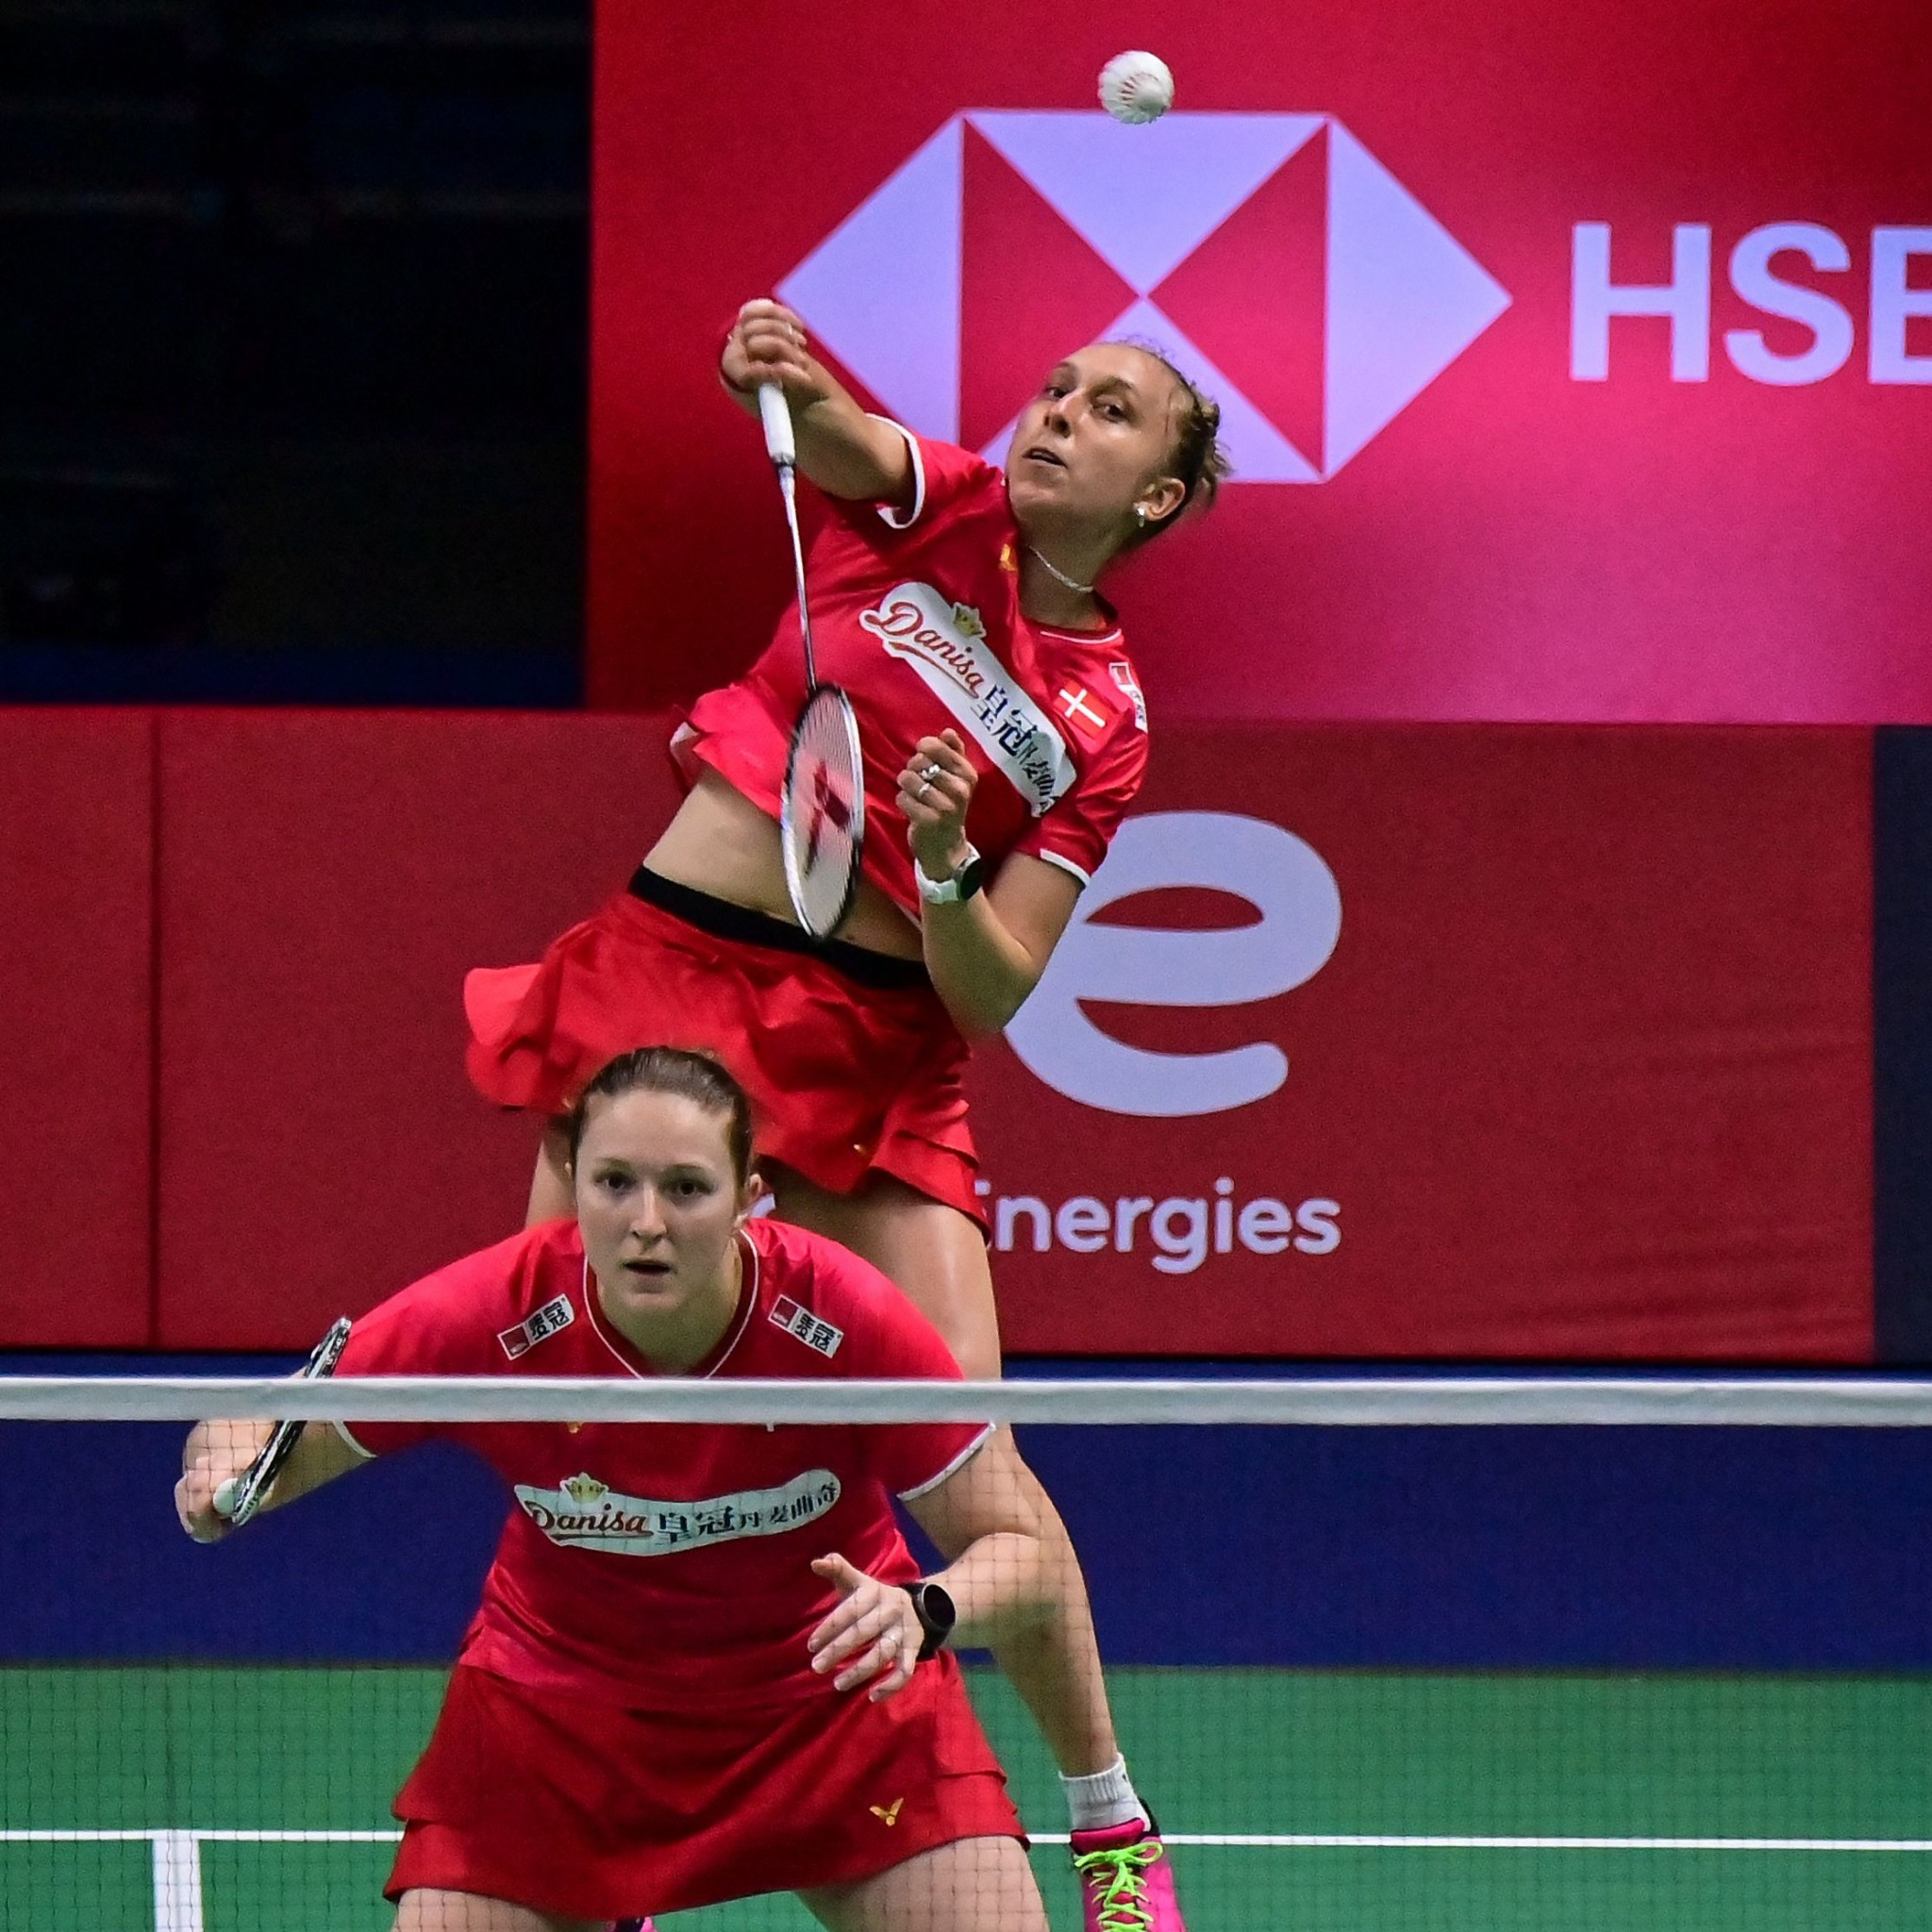 Denmark win fifth successive European Mixed Team Badminton Championship title with win over France